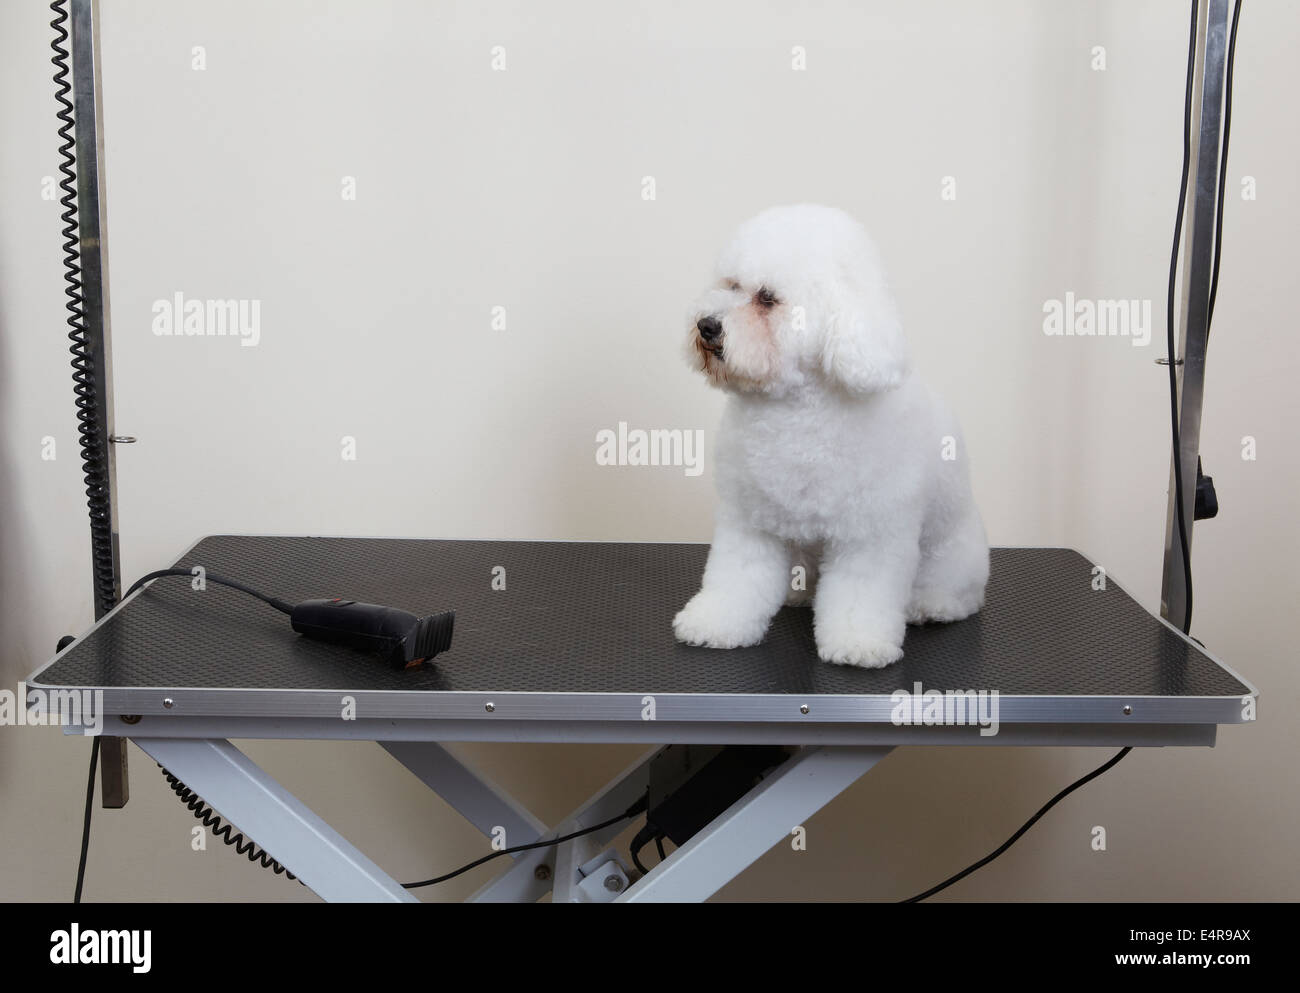 Bichon Frise on grooming parlour table Stock Photo